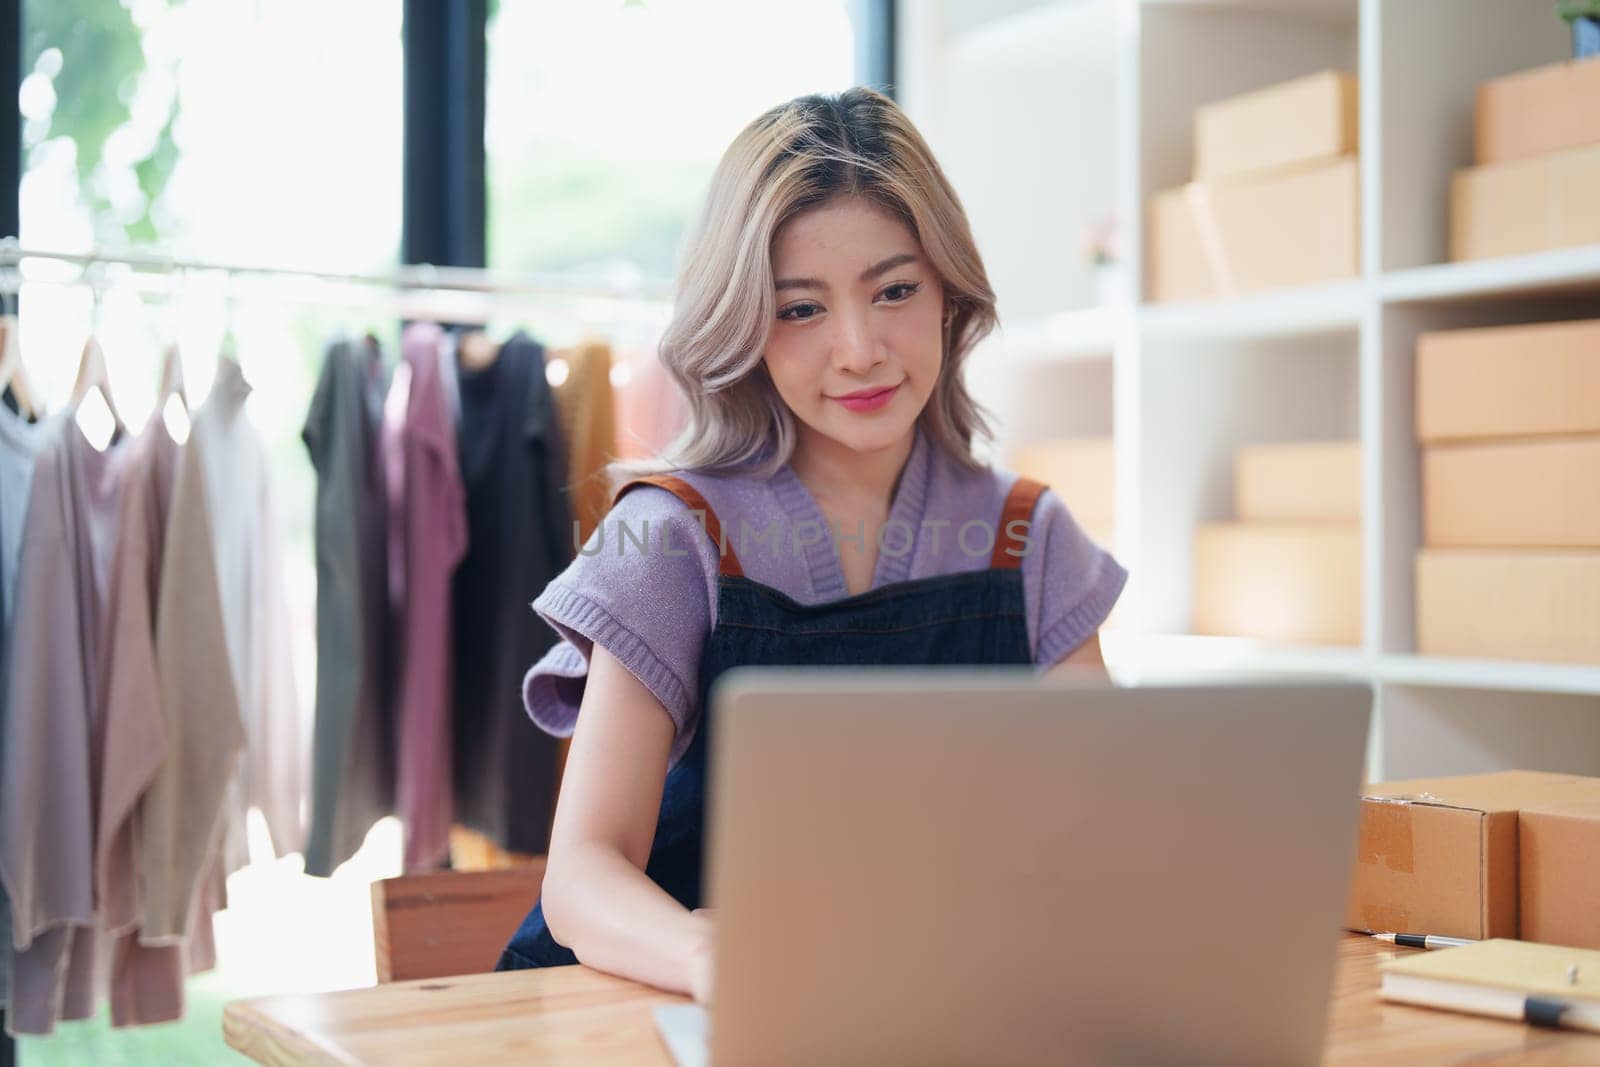 Starting small business entrepreneur of independent young Asian woman online seller is using computer and taking orders to pack products for delivery to customers. SME delivery concept.